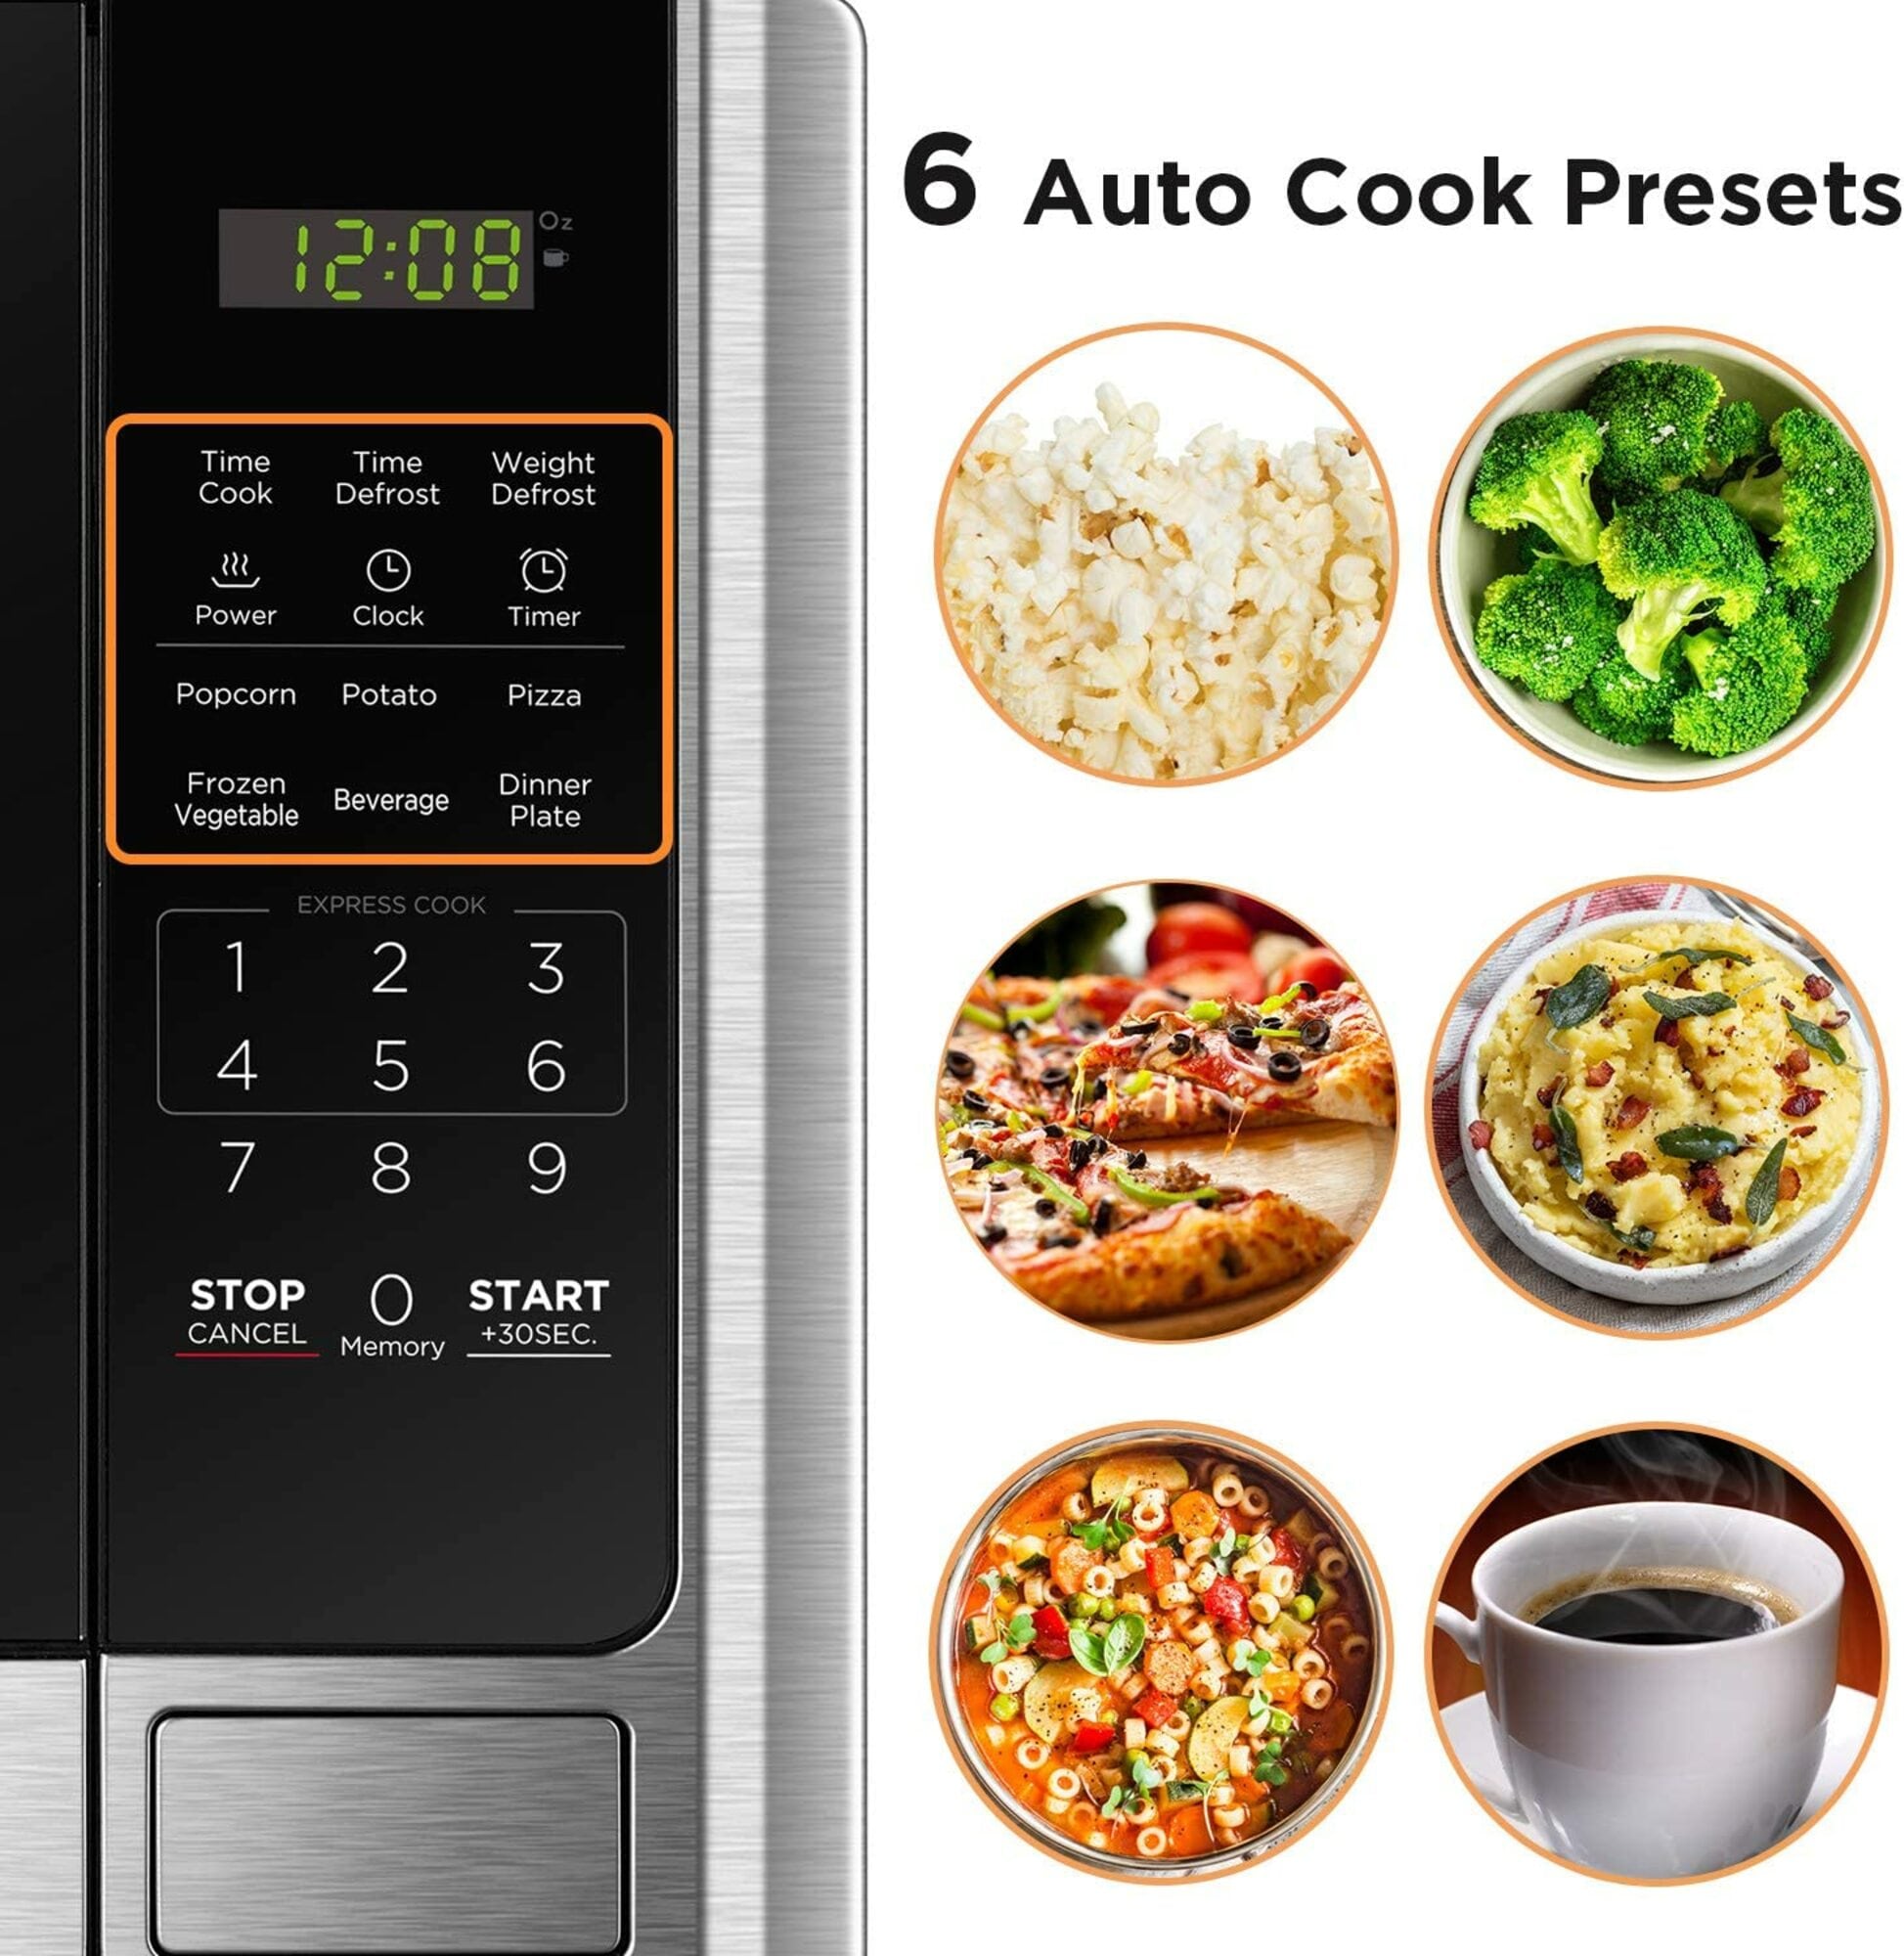 Black+decker Digital Microwave Oven with Turntable Push-Button Door Child Safety Lock Stainless Steel 0.9 CU.FT